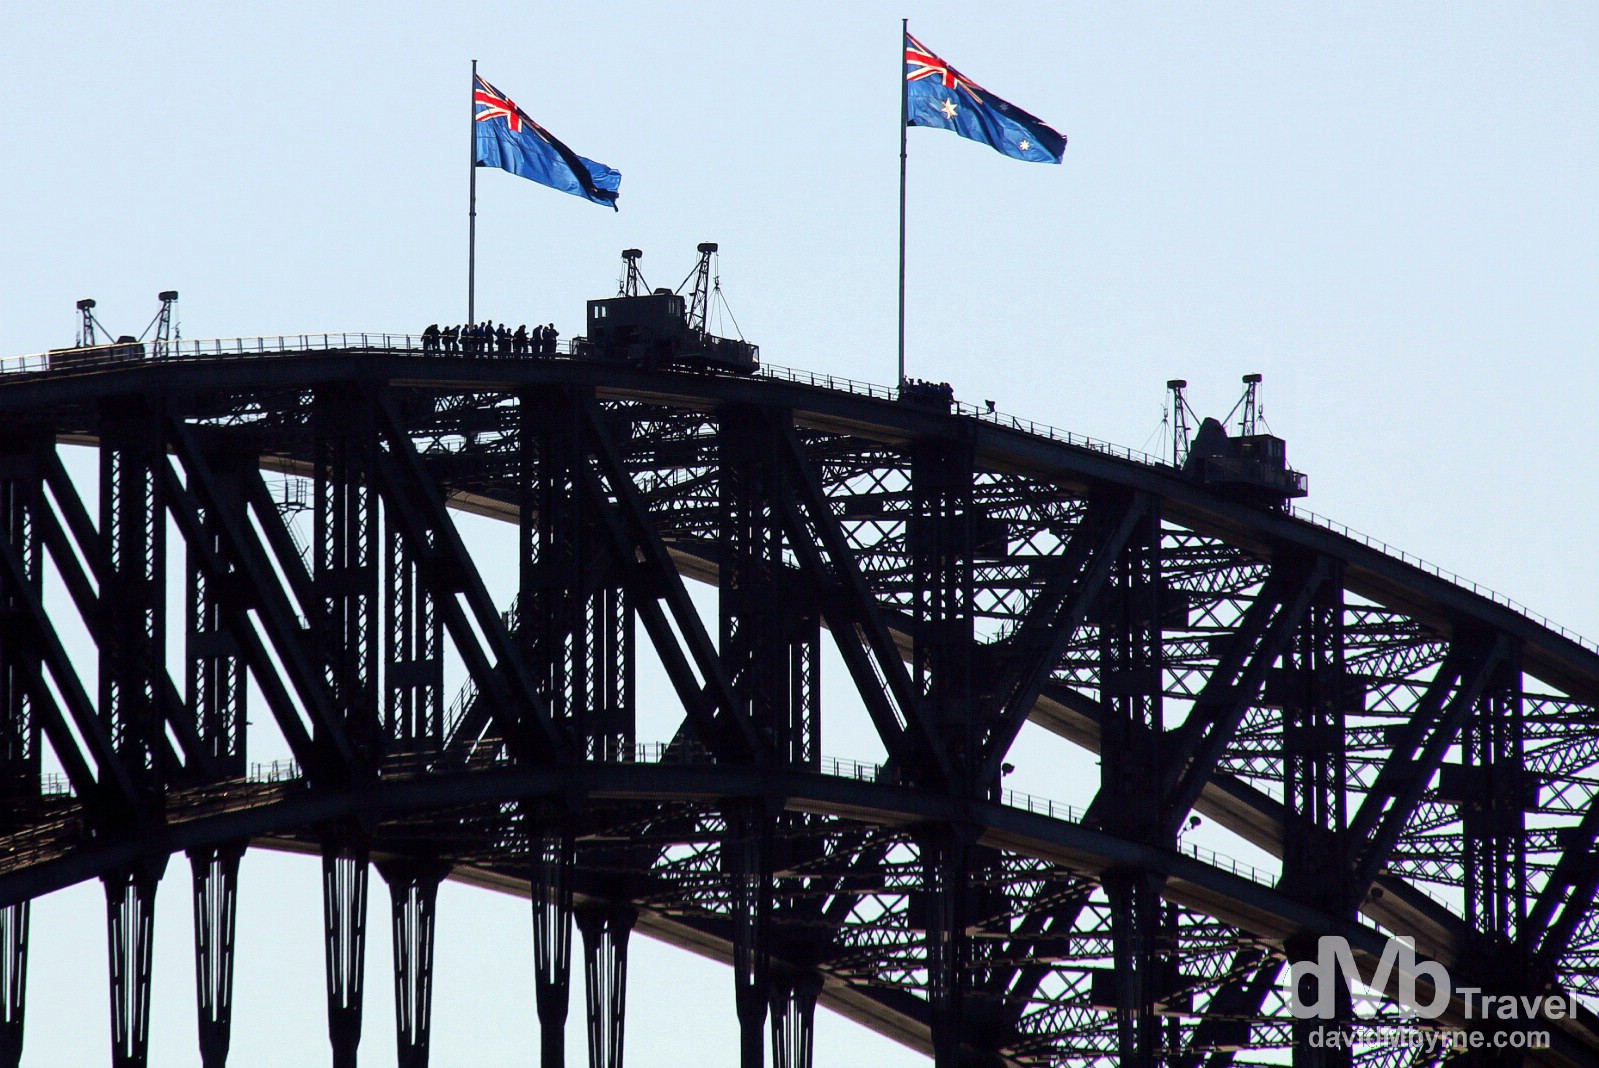 Climbers atop the Sydney Harbour Bridge as seen from the Manly Ferry in Sydney Cove, Sydney, Australia. June 8th 2012. 